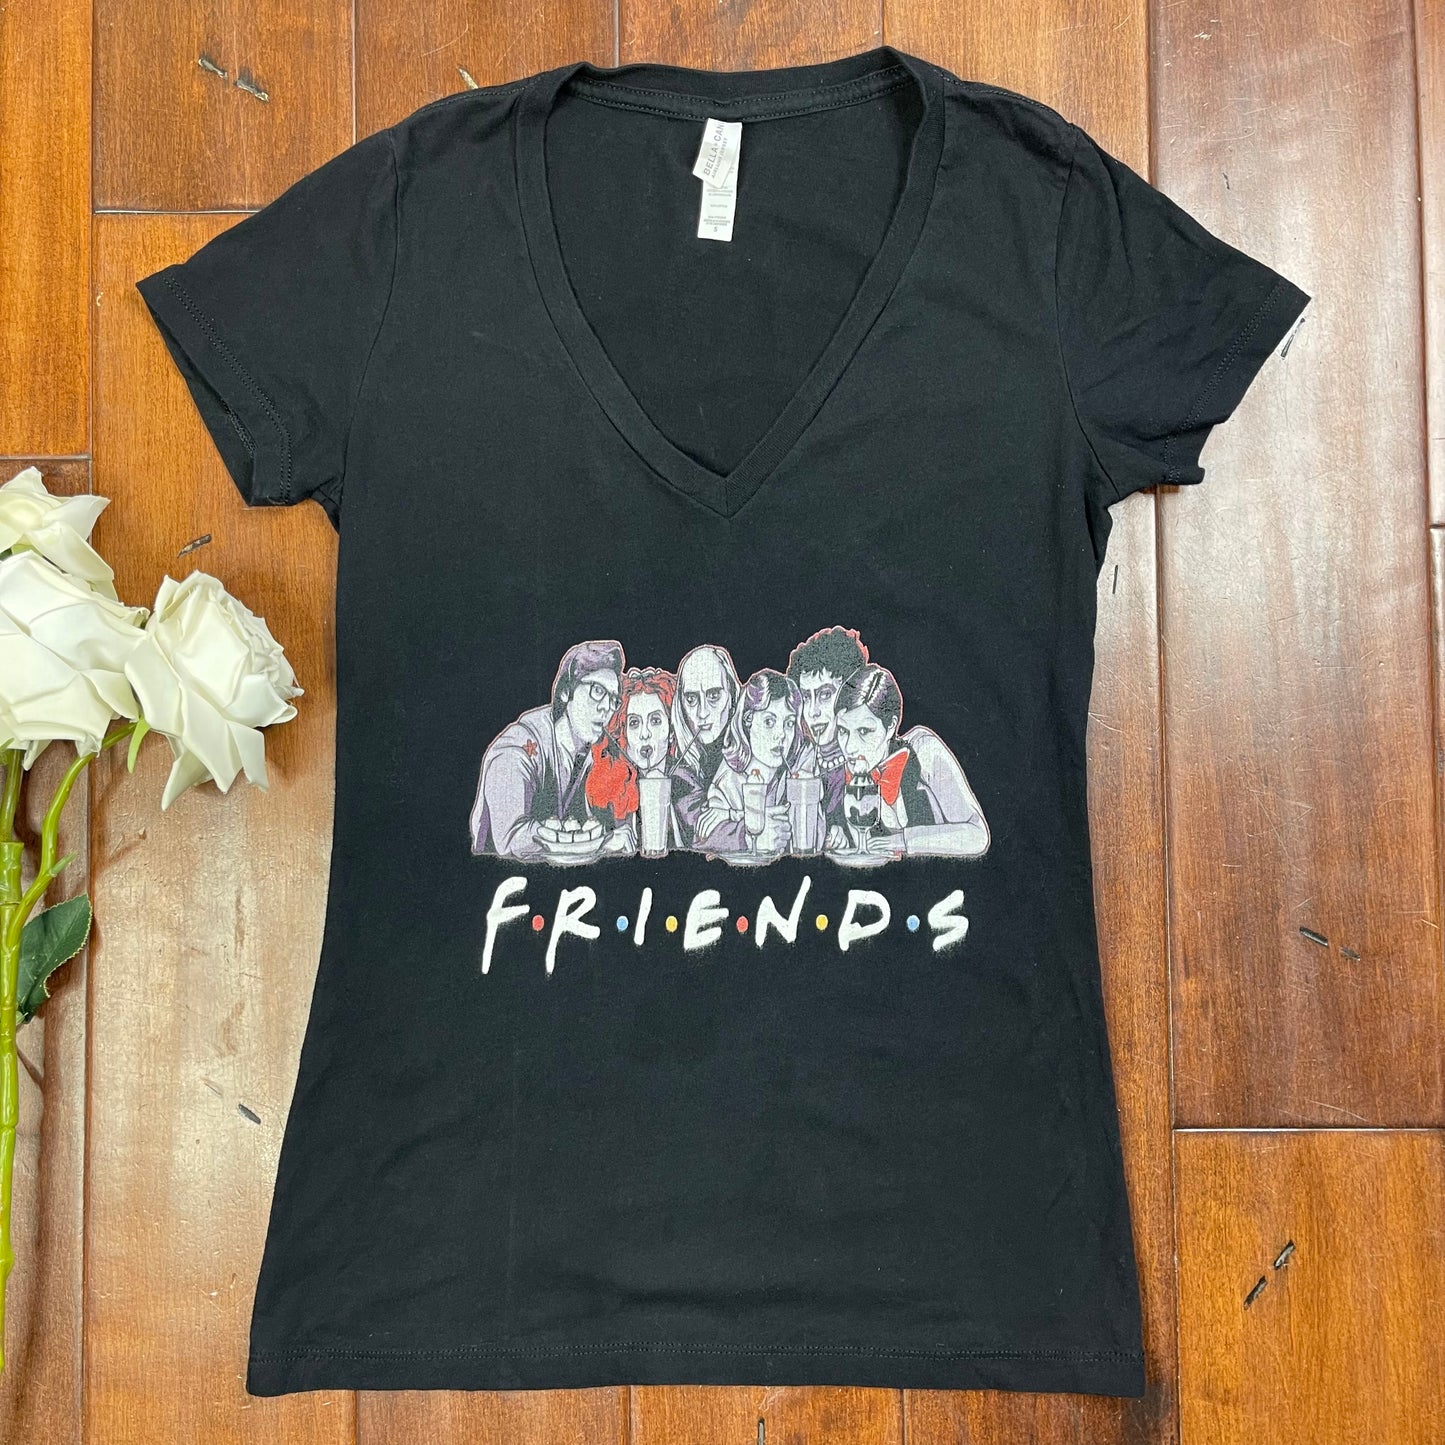 THRIFTED ROCKY HORROR PICTURE SHOW MEETS F.R.I.E.N.D.S V-NECK TEE